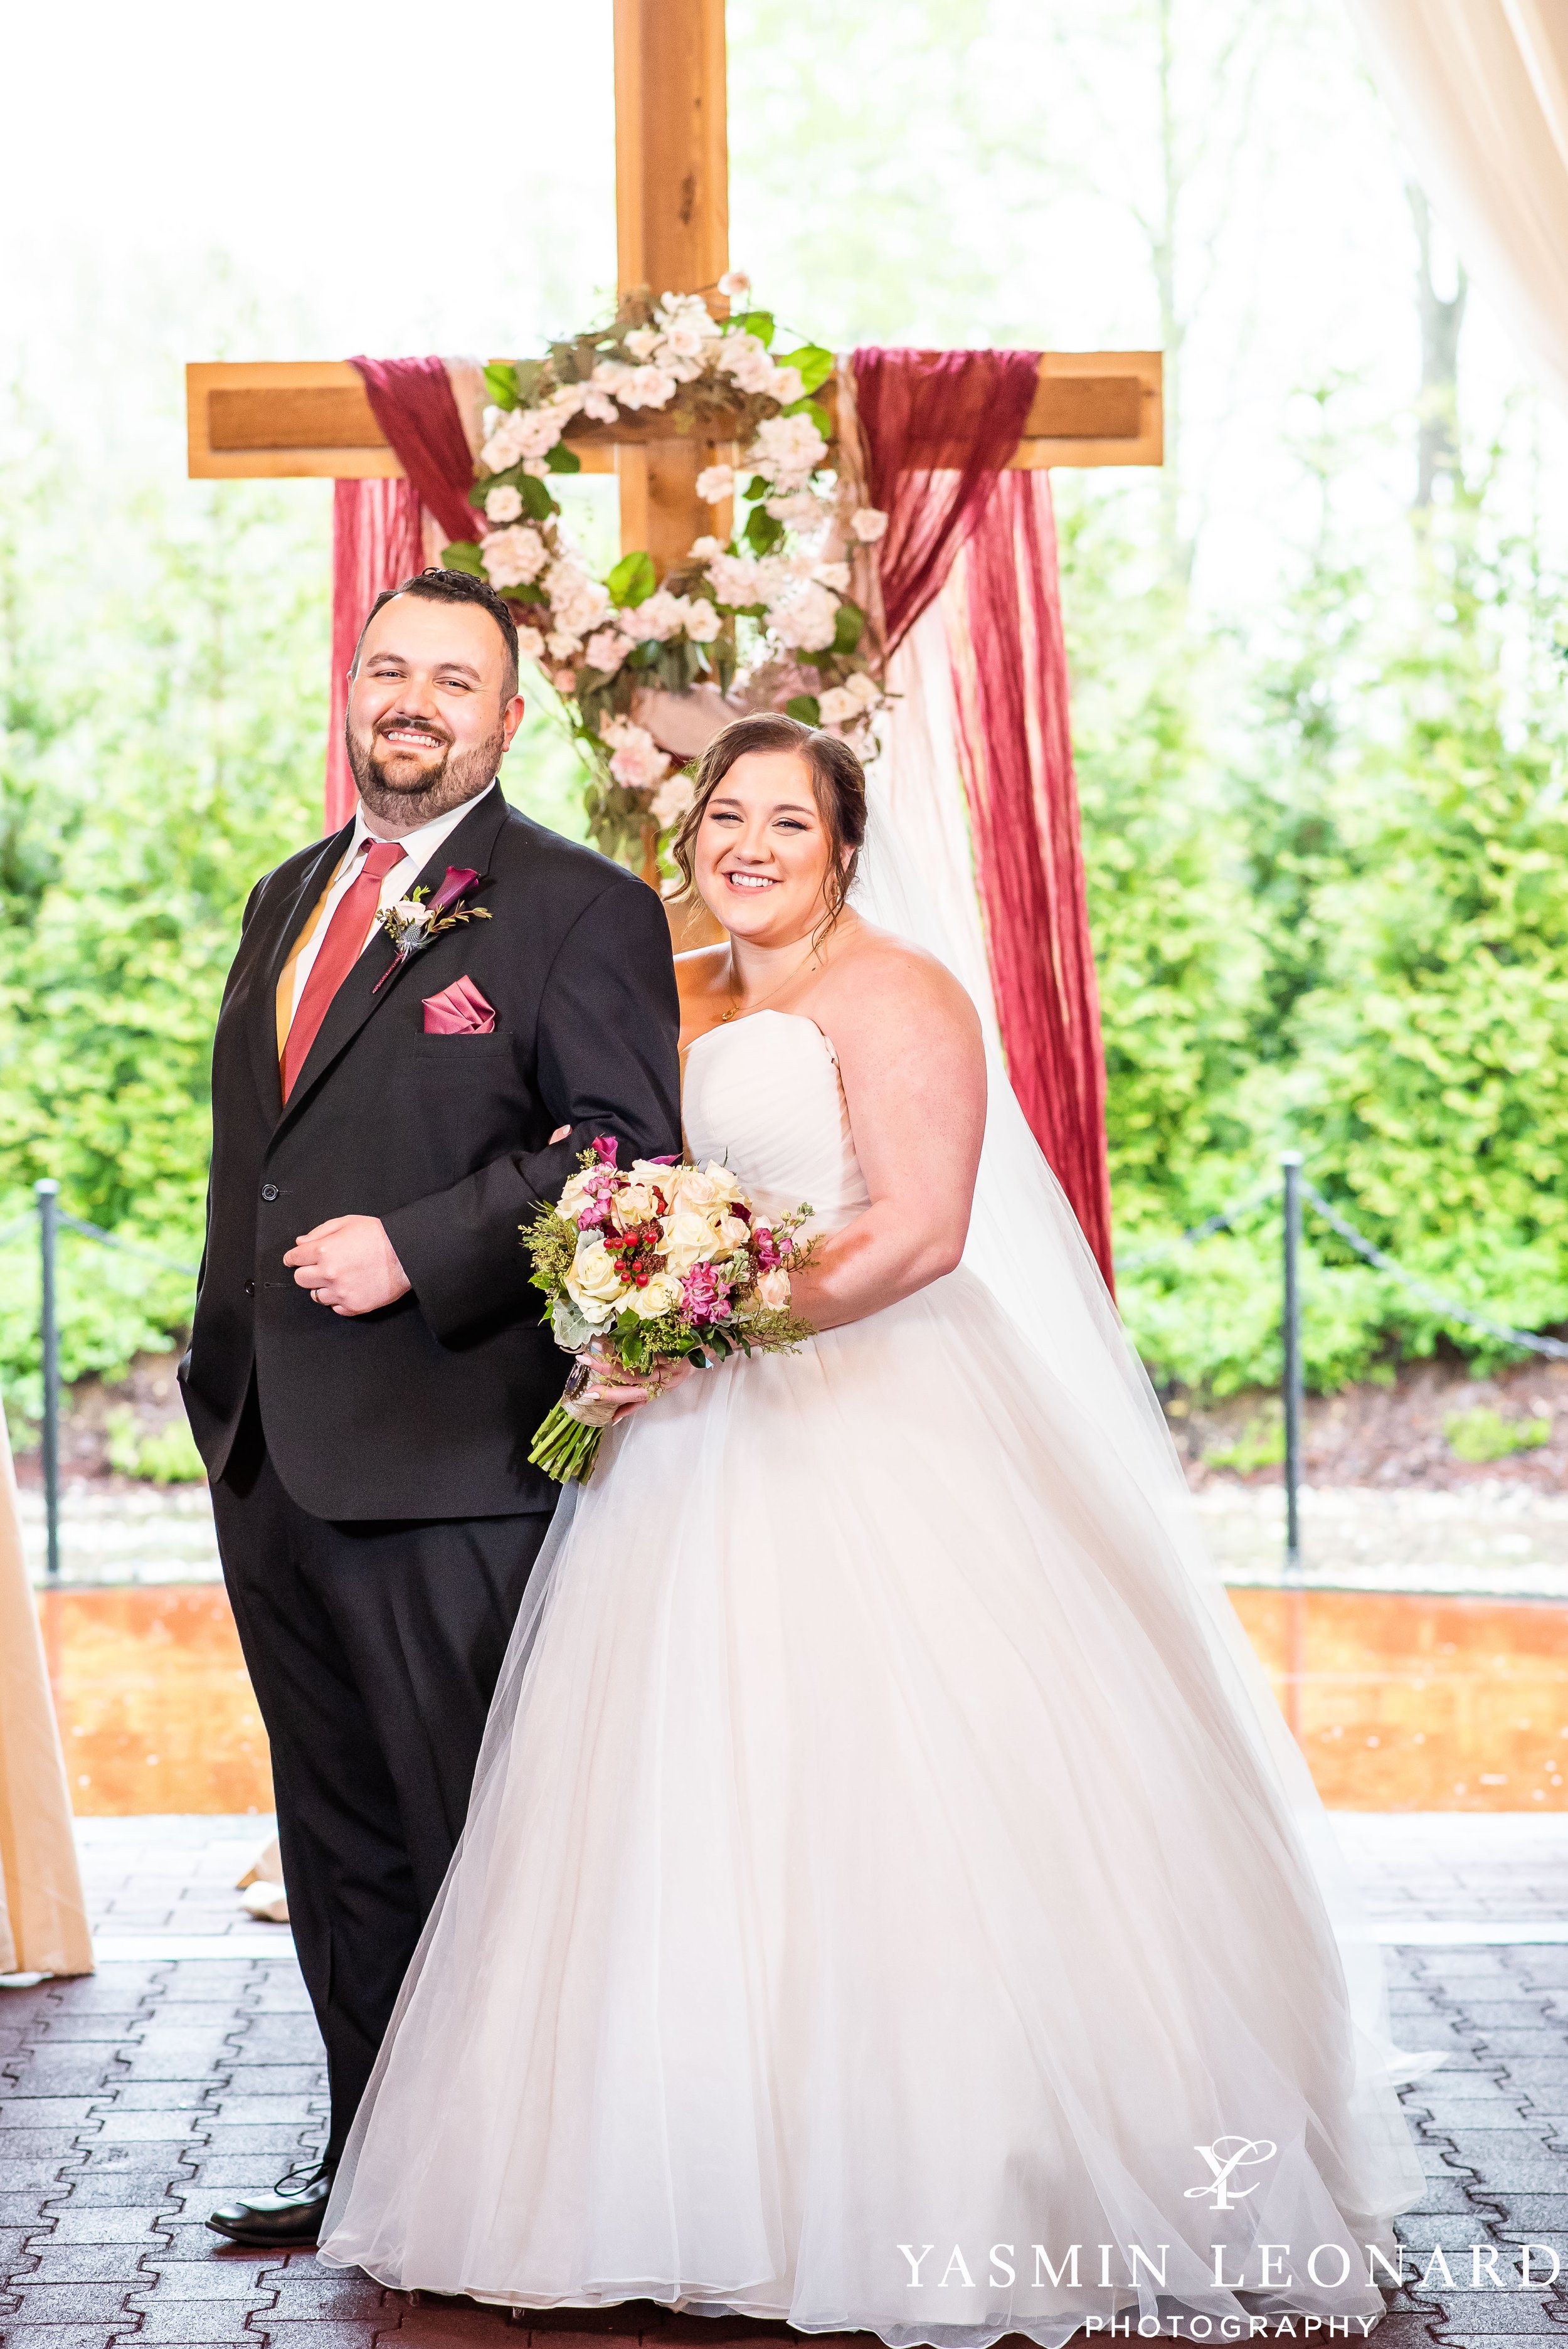 Legacy Stables and Events - Legacy Stables Wedding - Morgan and Logan - NC Weddings - Marry Me NC - Triad Weddings - Best Wedding Photographer Near Me - Best Photographer in High Point - Yasmin Leonard Photography-22.jpg